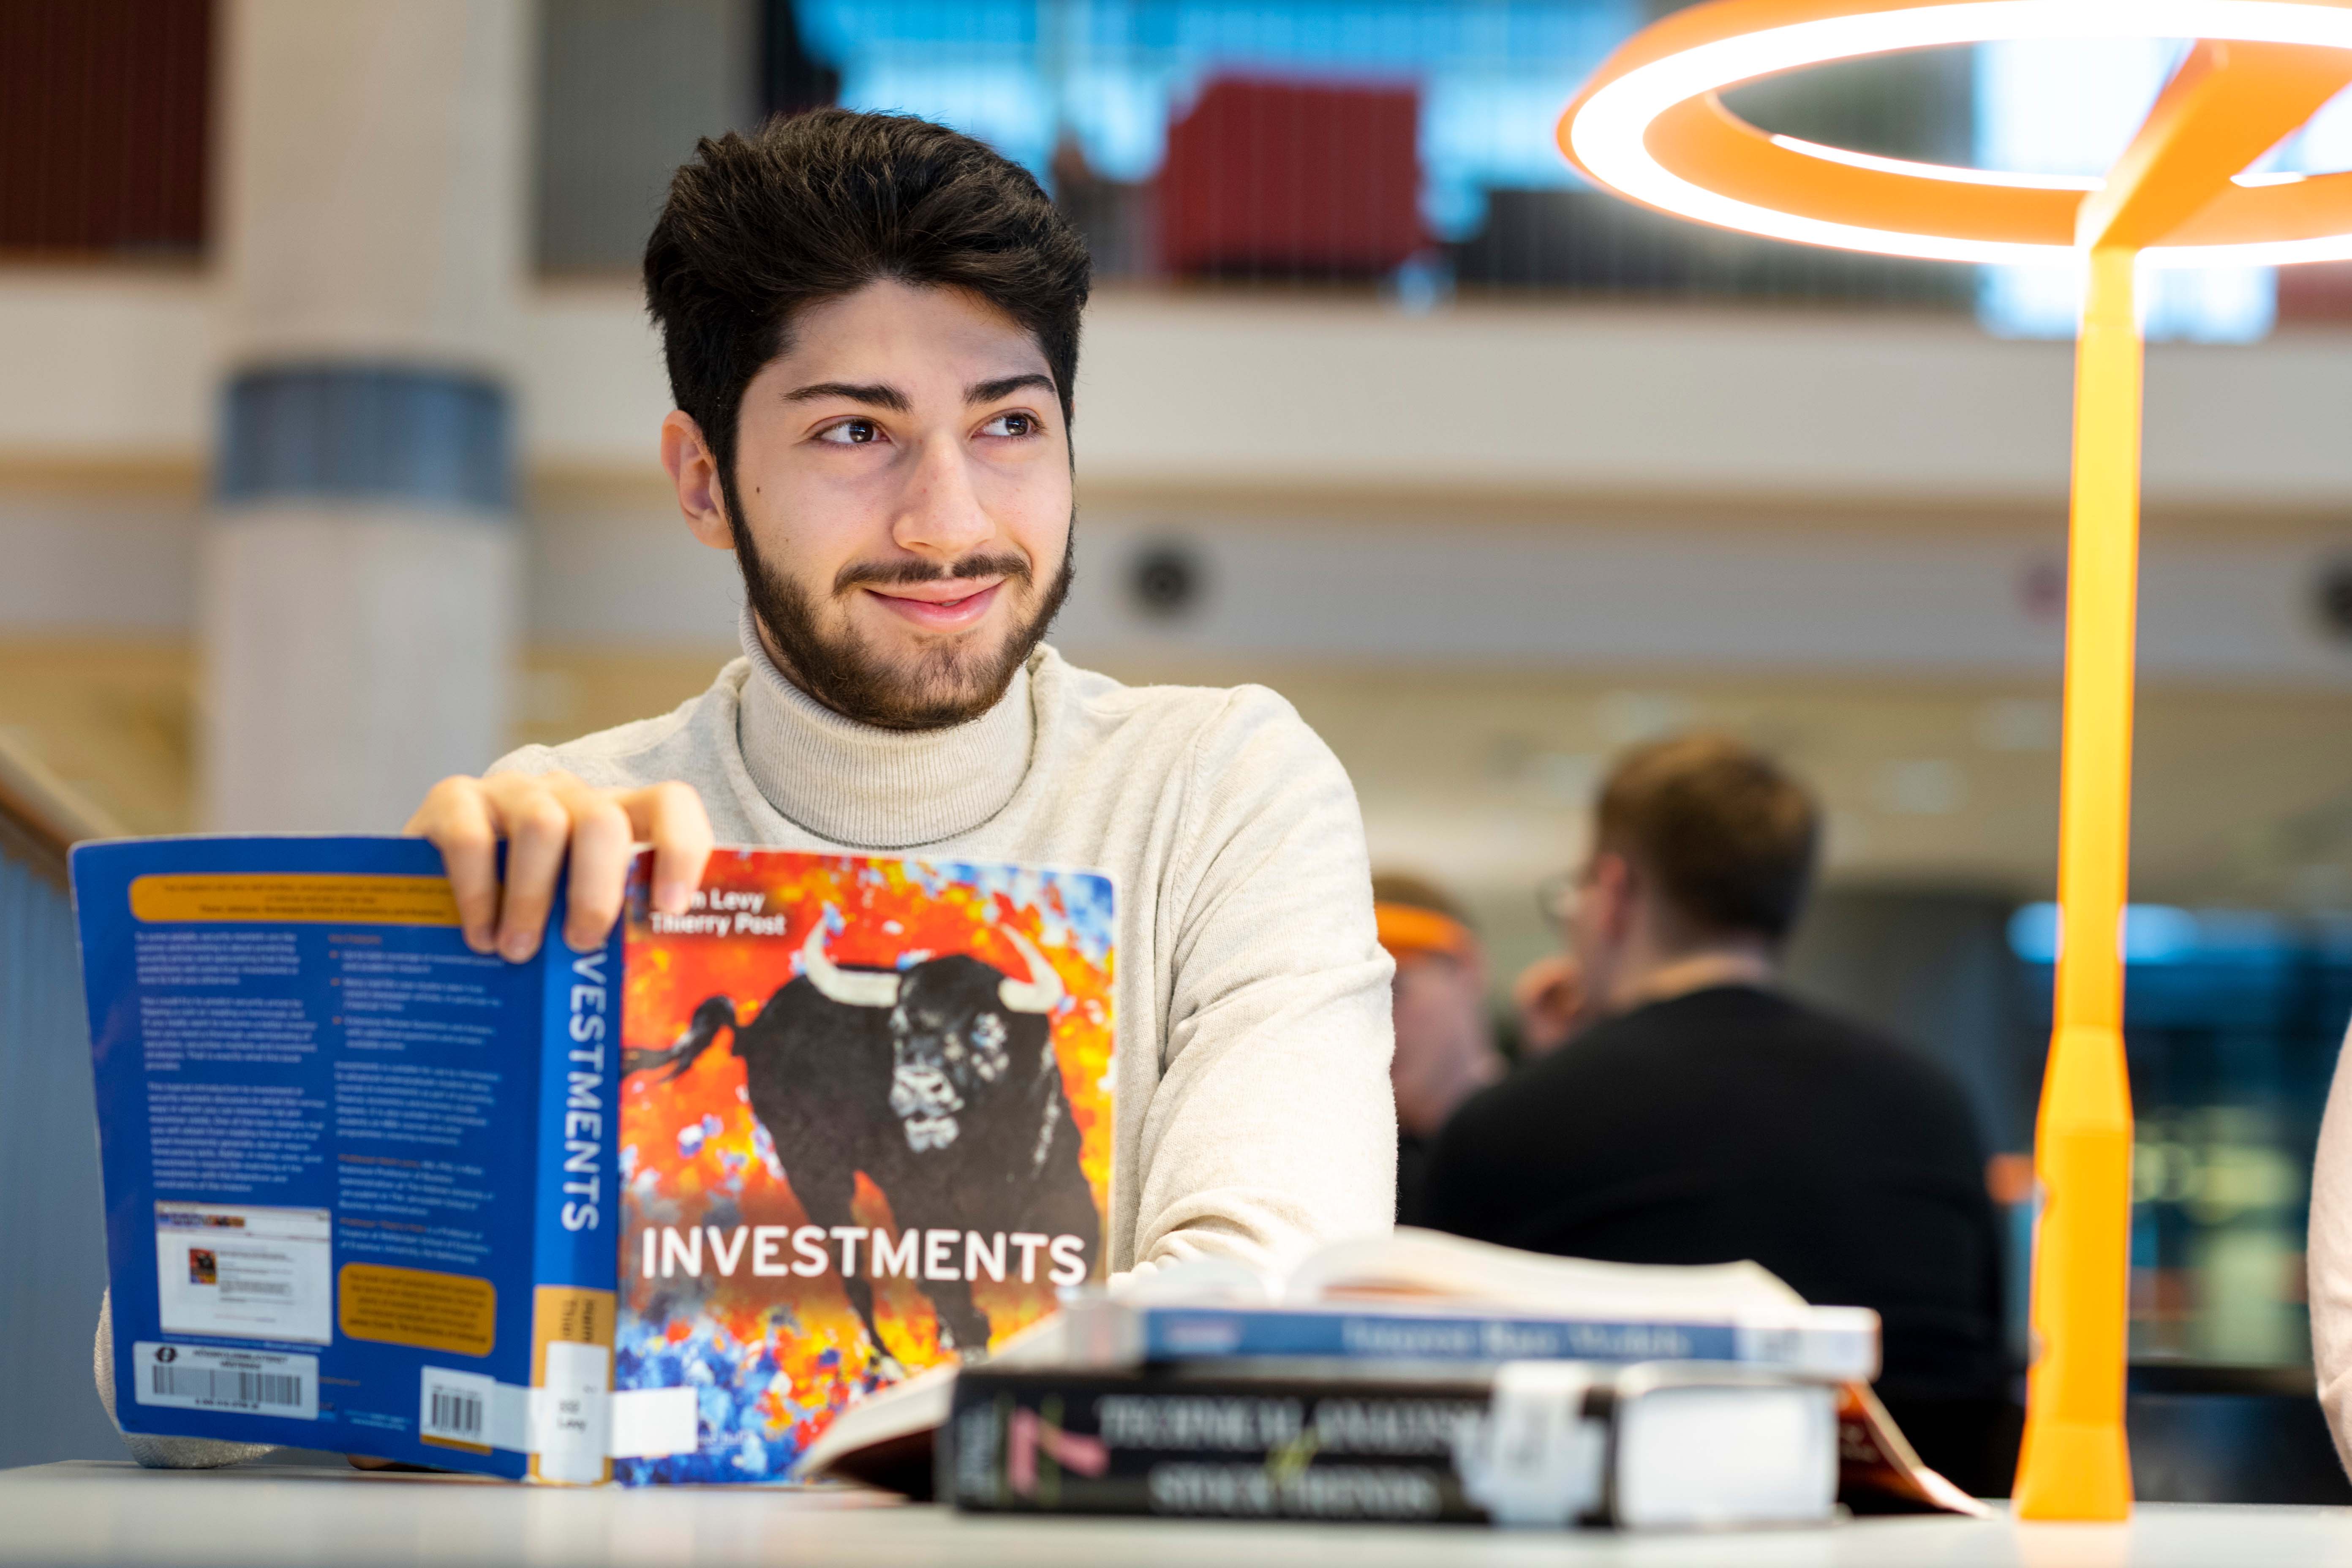 Student from Analytical finance holding a book